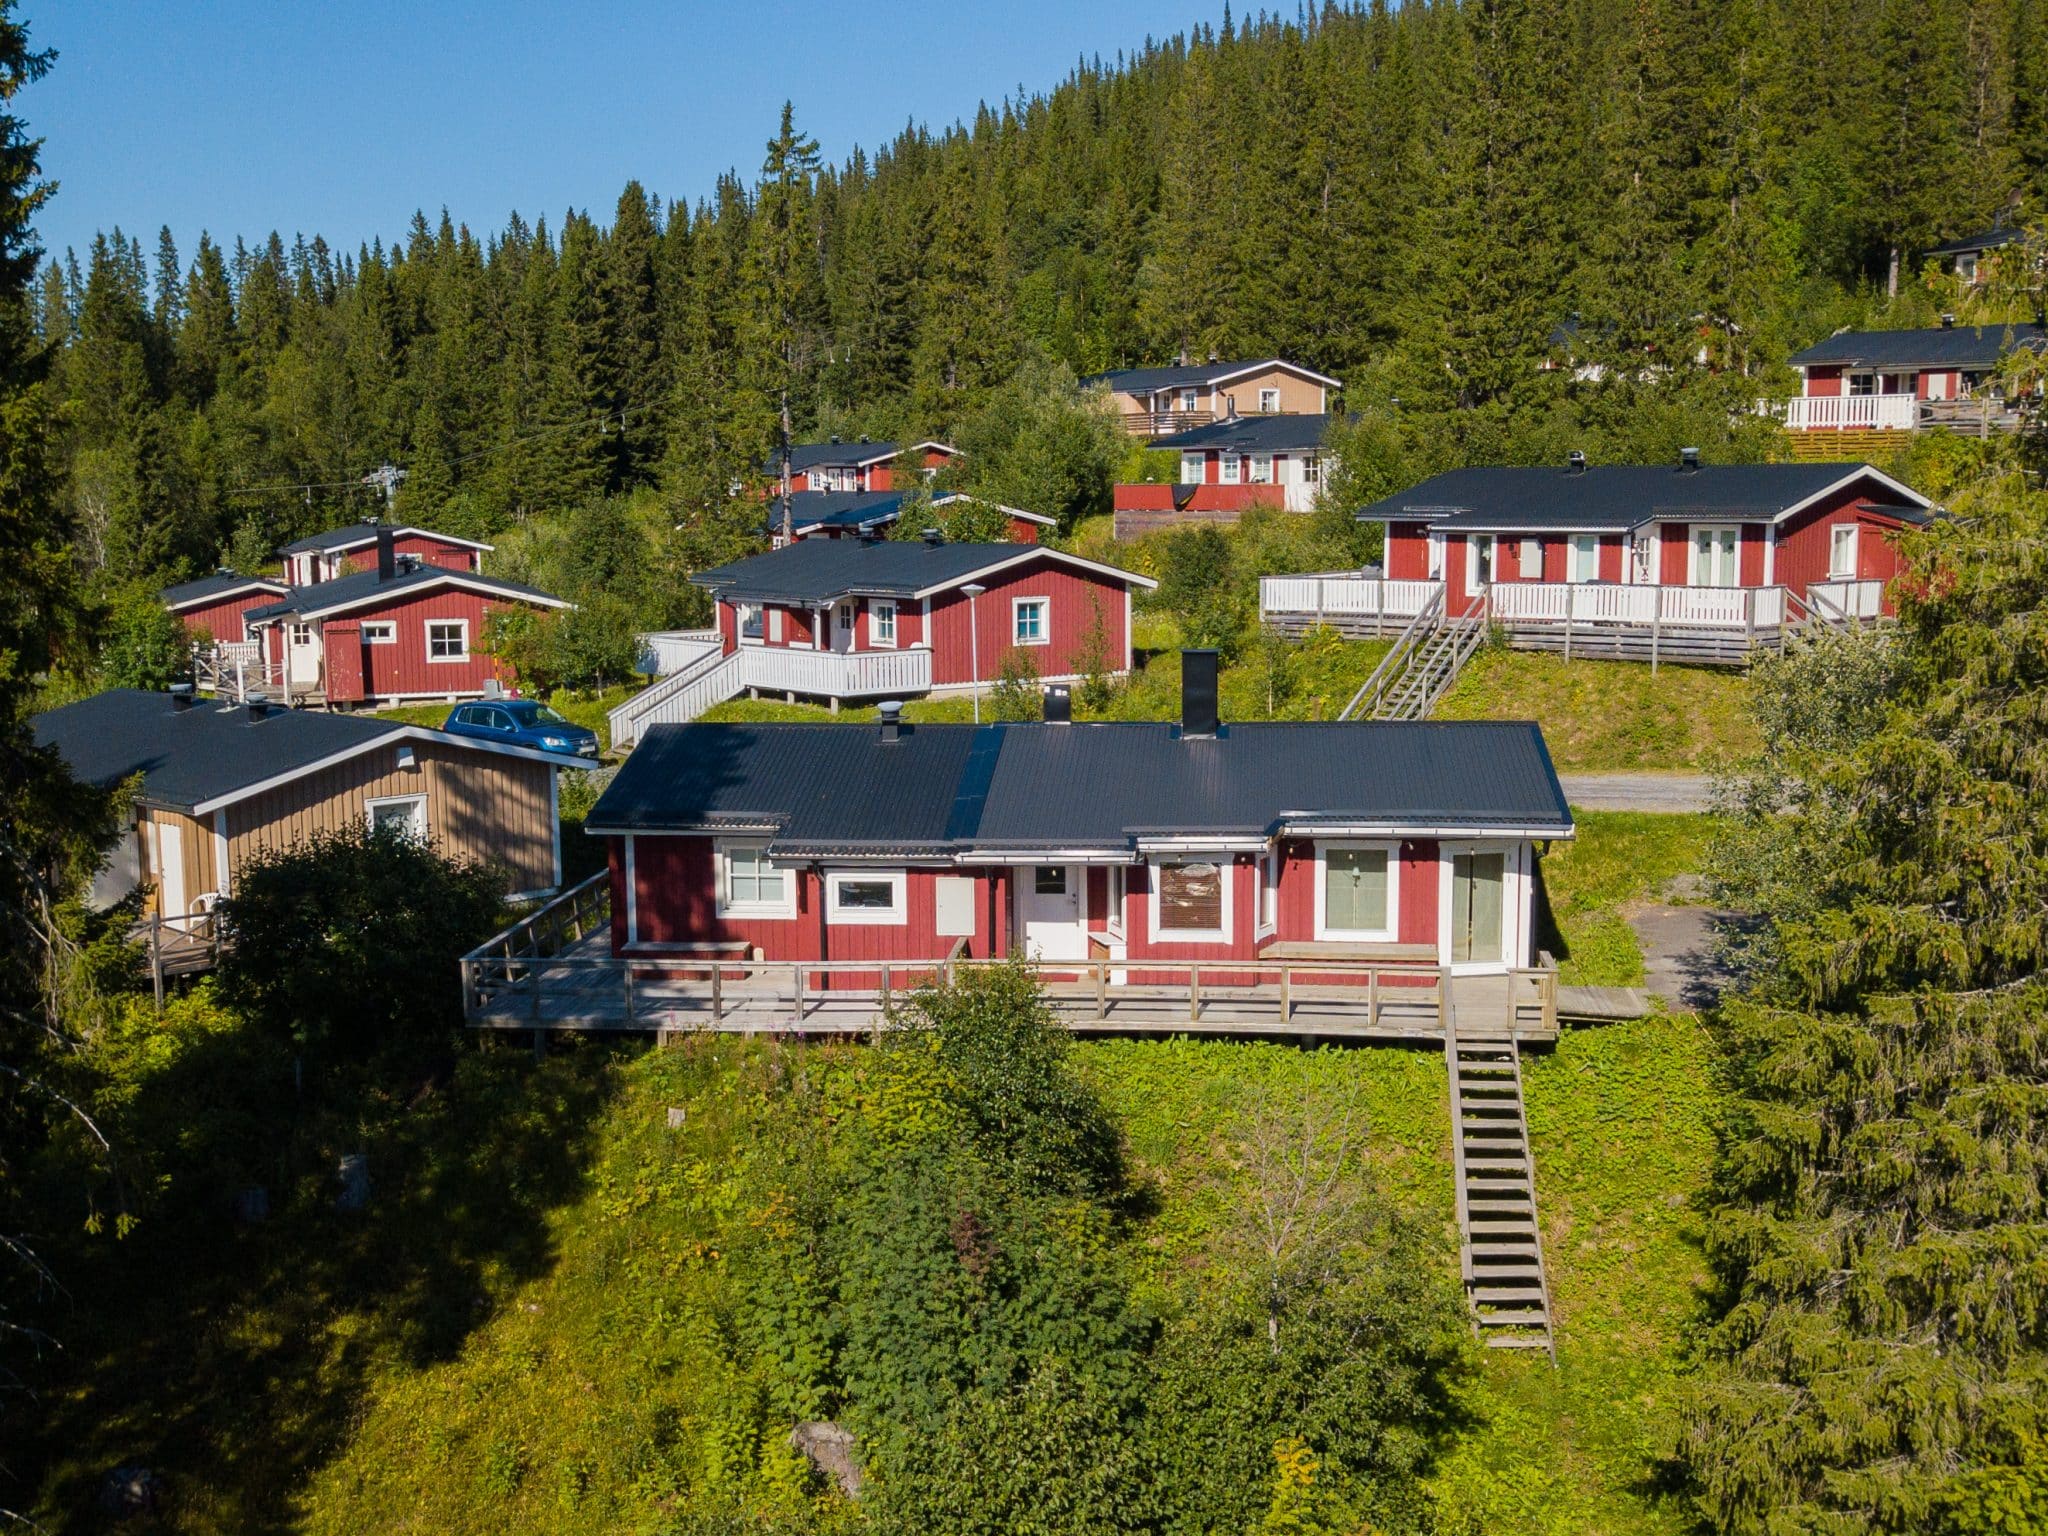 Green mountain slope with about 10 red single-storey semi-detached houses with white knots and balconies surrounded by fir forest